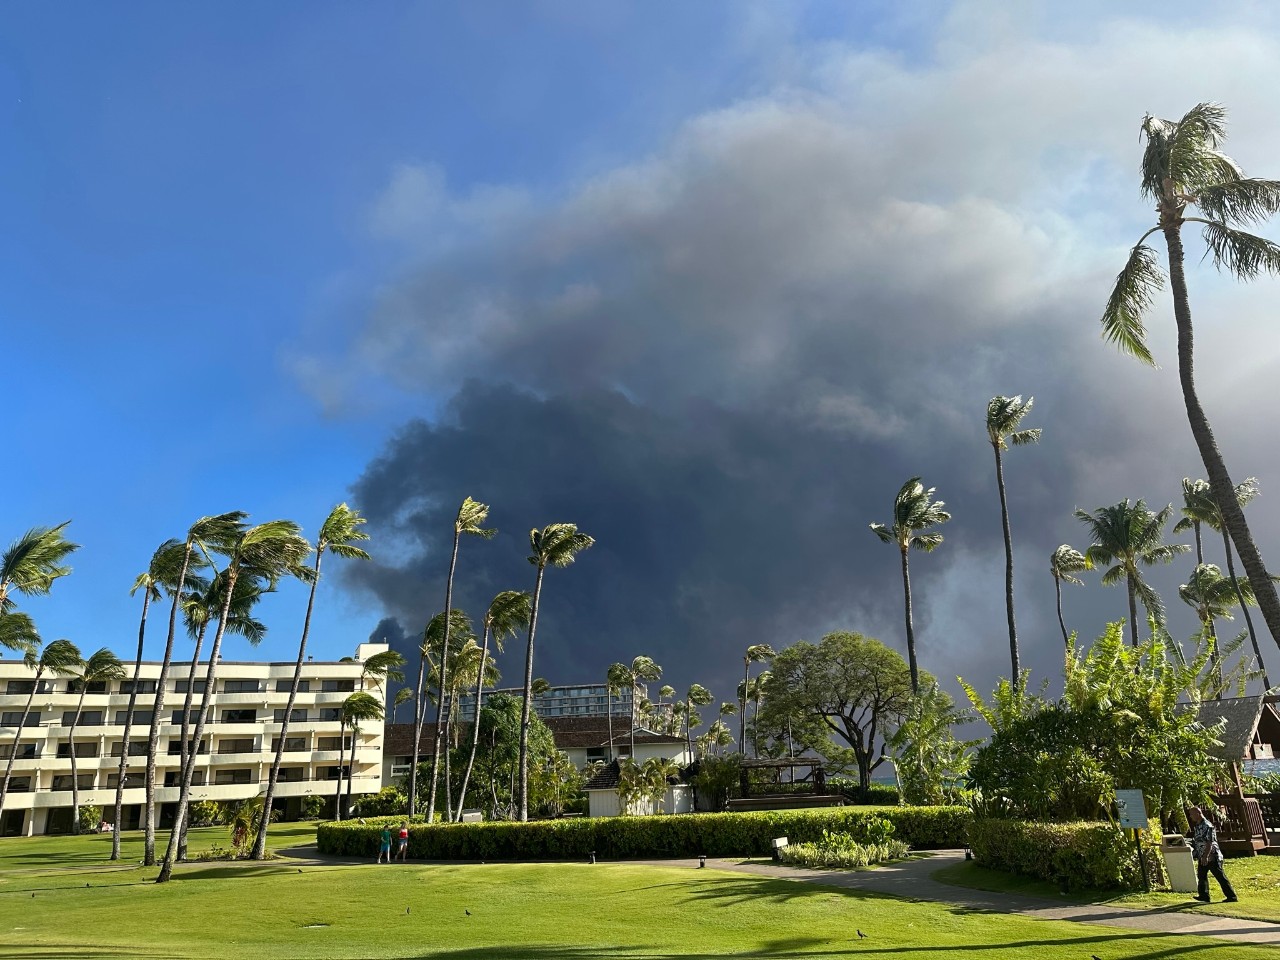 A view from a resort in Ka'anapali looking south towards Lahaina on August 9th. Source: Guy Carpenter event reconnaissance